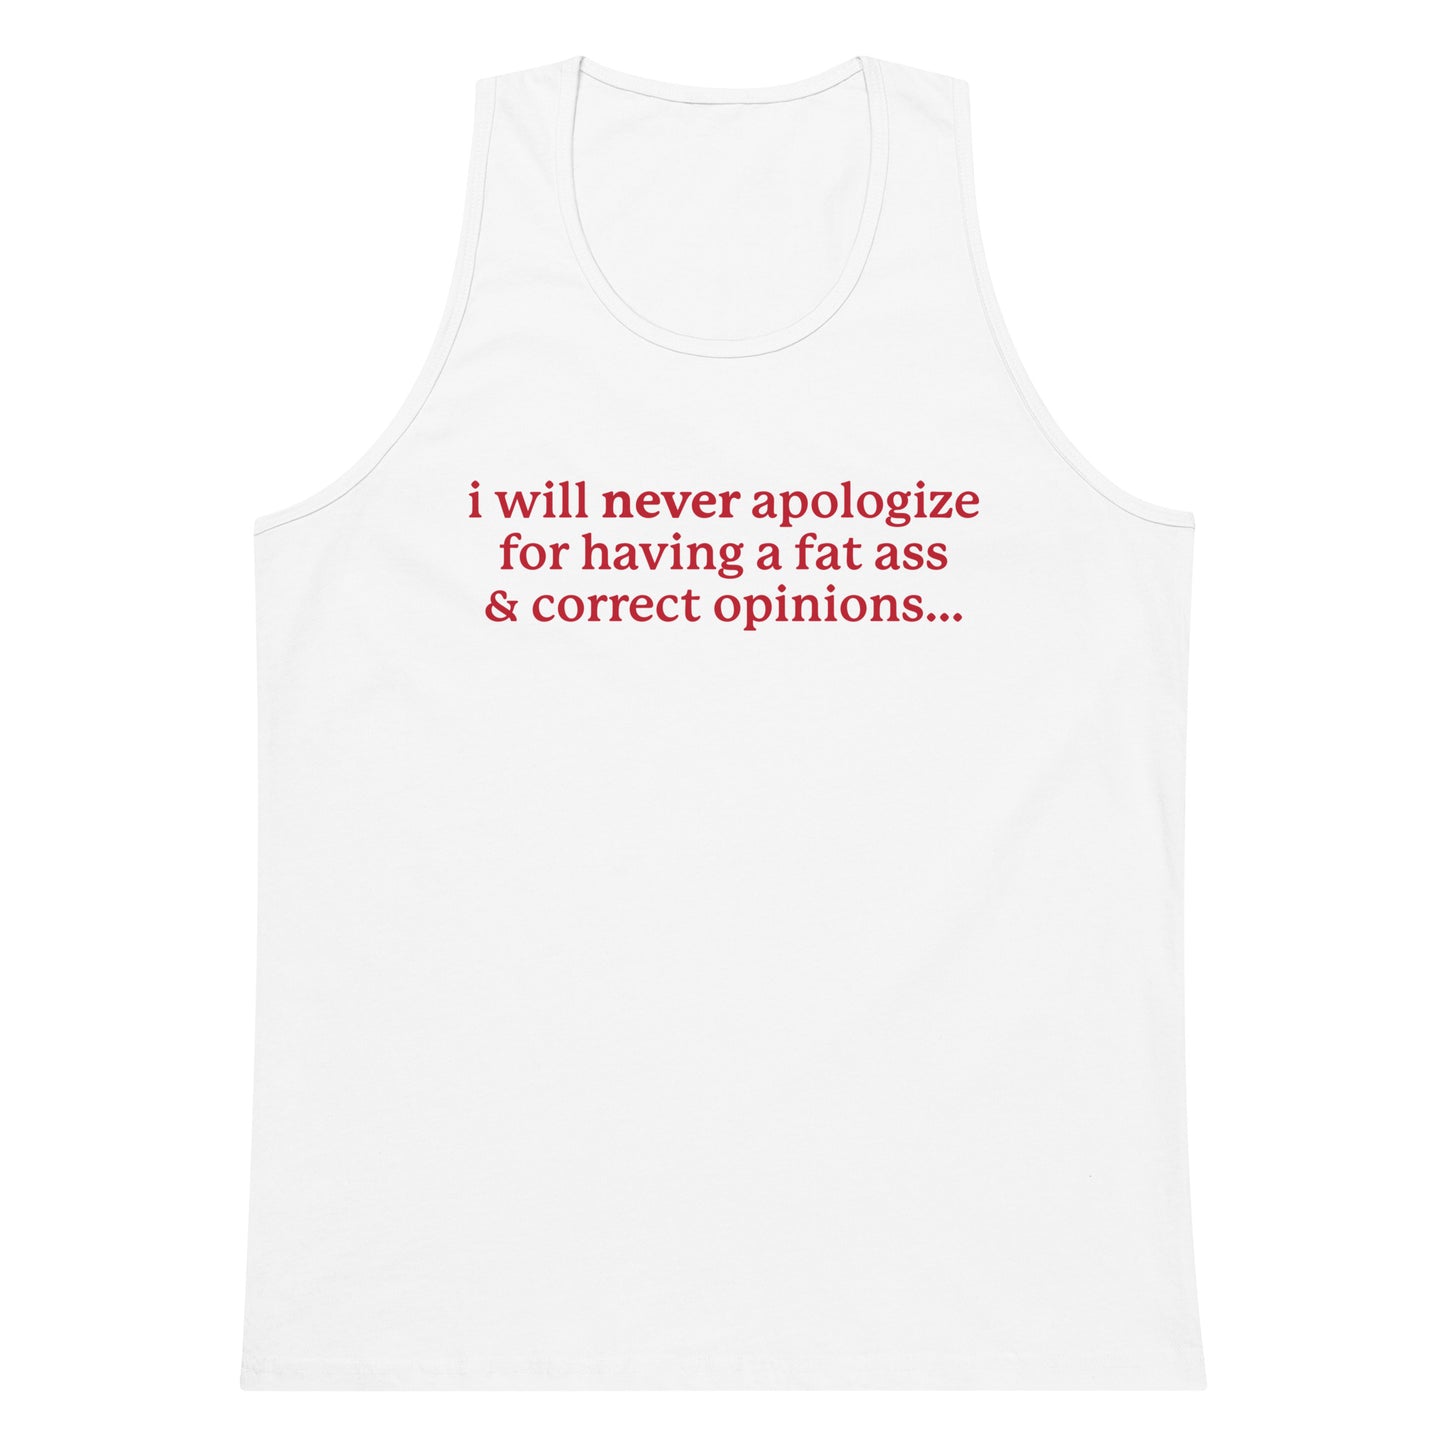 I Will Never Apologize (Fat Ass & Correct Opinions) tank top